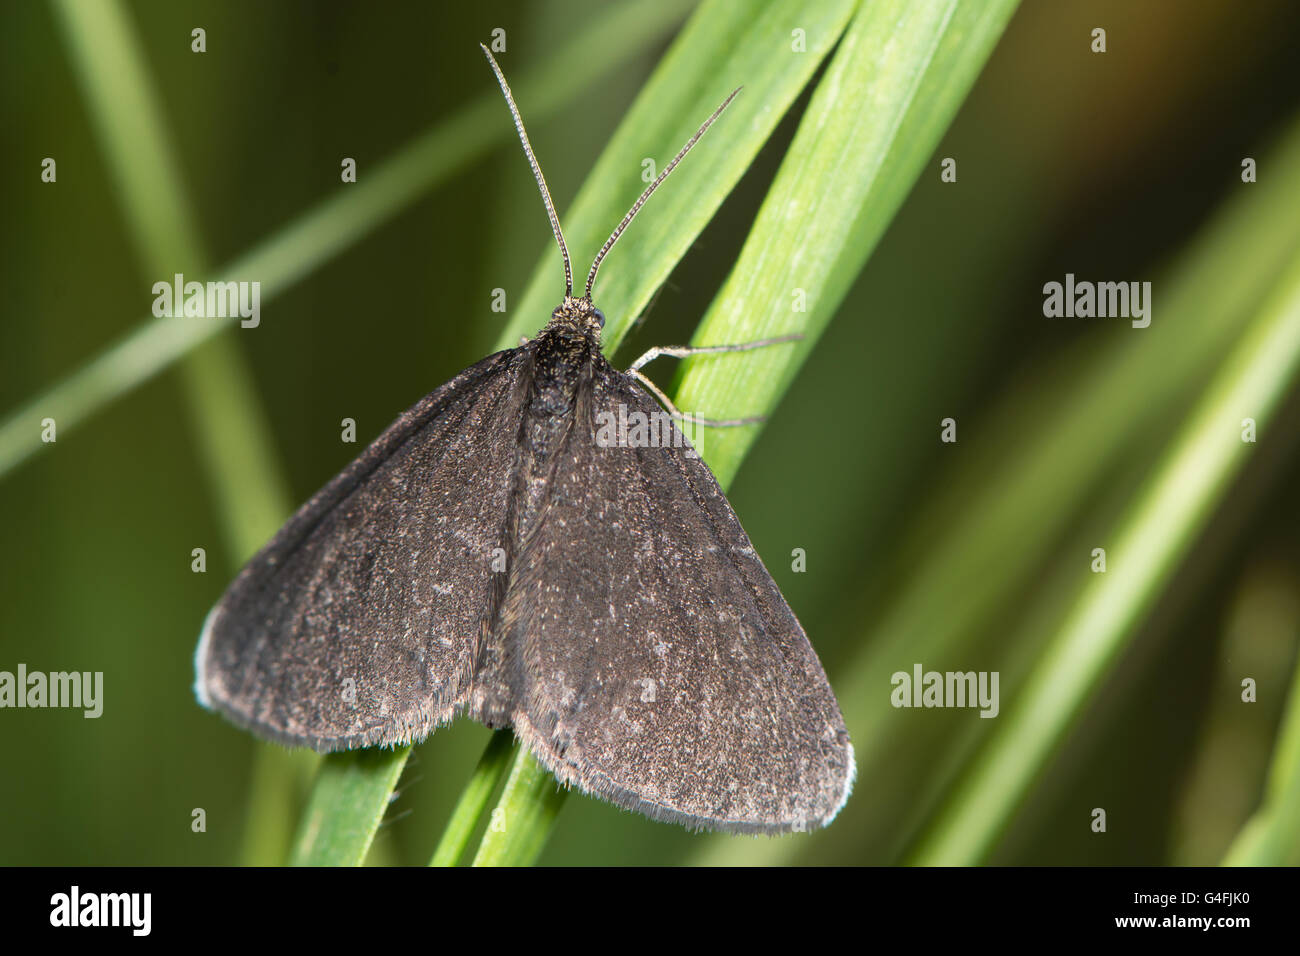 Chimney Sweeper moth (Odezia atrata). Distinctive black day-flying species in the family Geometridae, at rest on grass Stock Photo